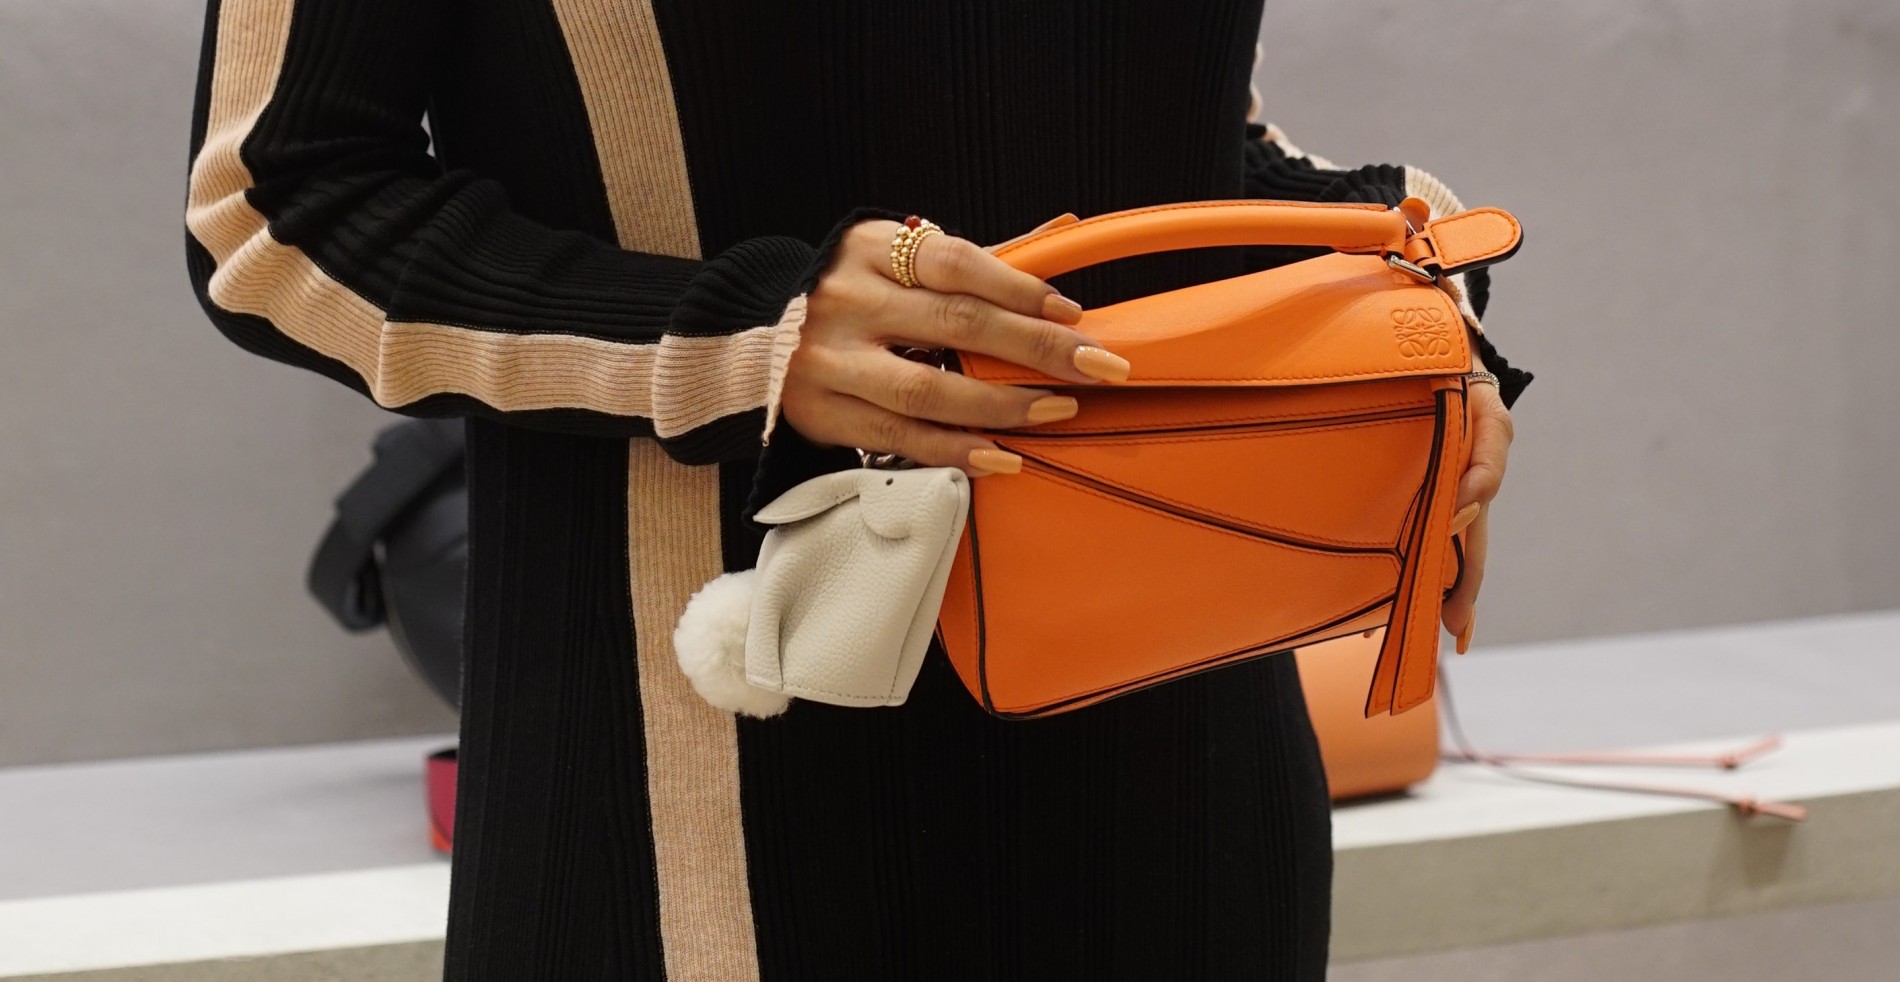 Loewe's Puzzle Bag is the newest favorite among celebrities